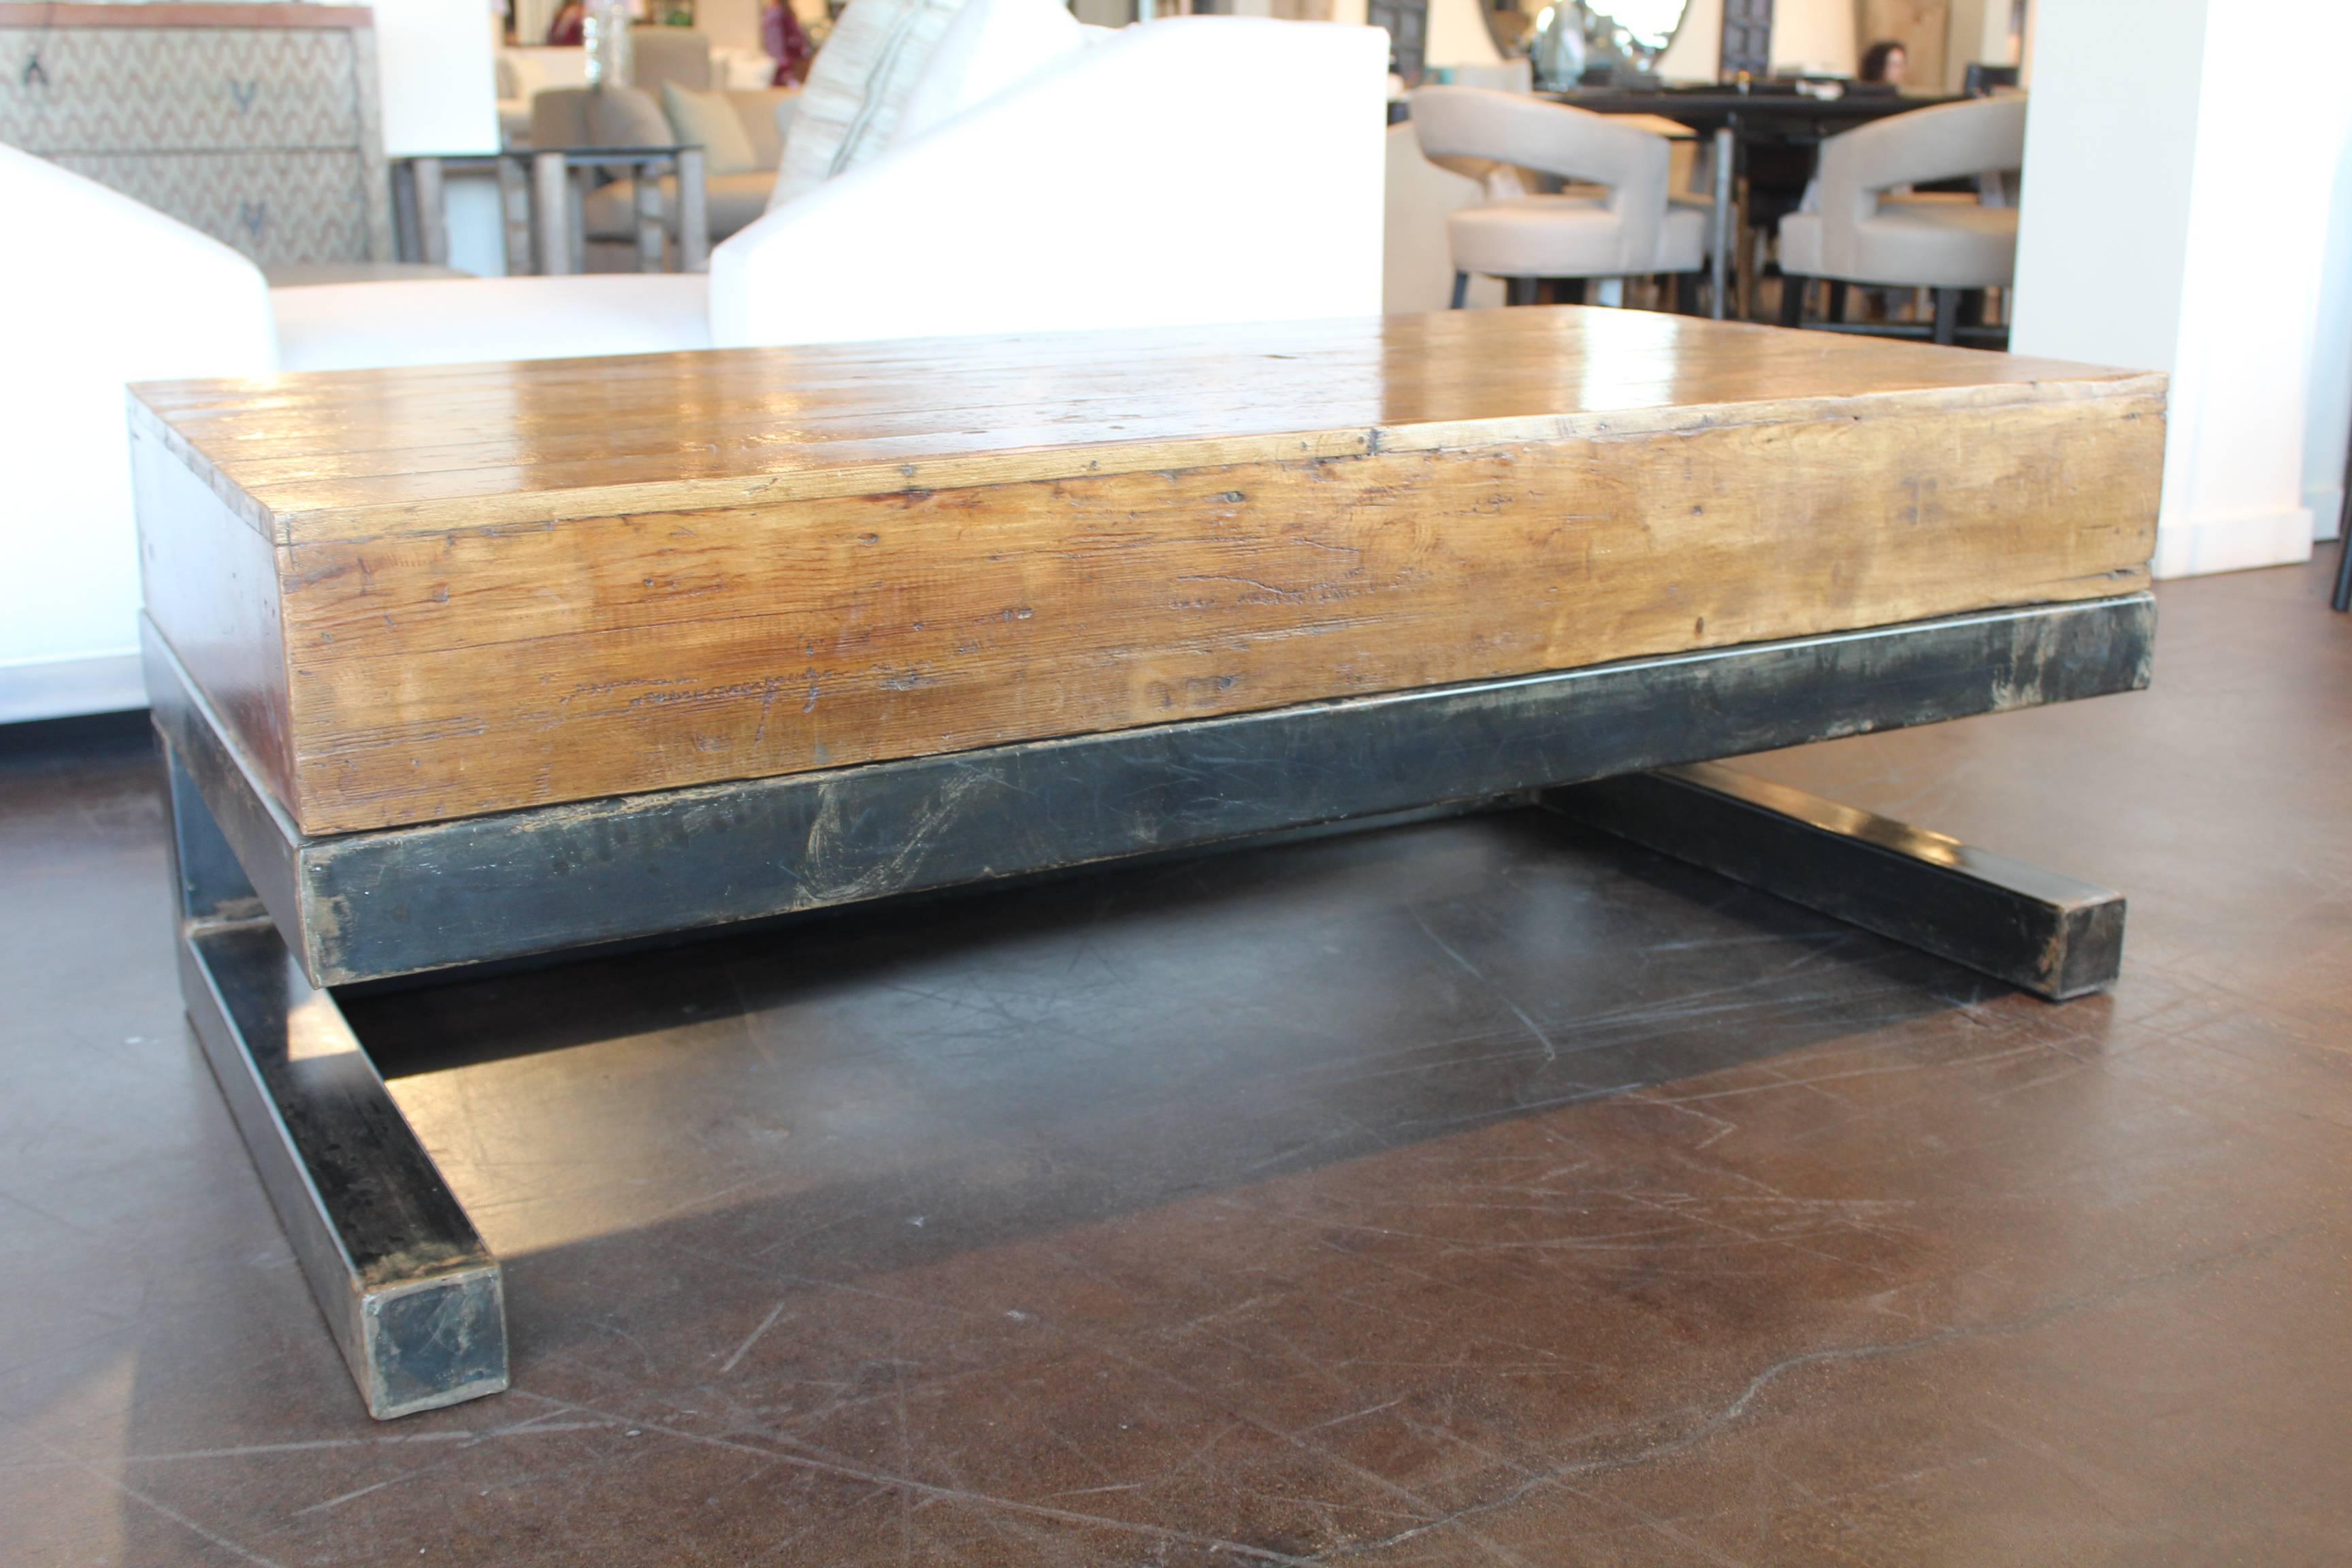 Vintage french pine factory work platform with steel base as coffee table.